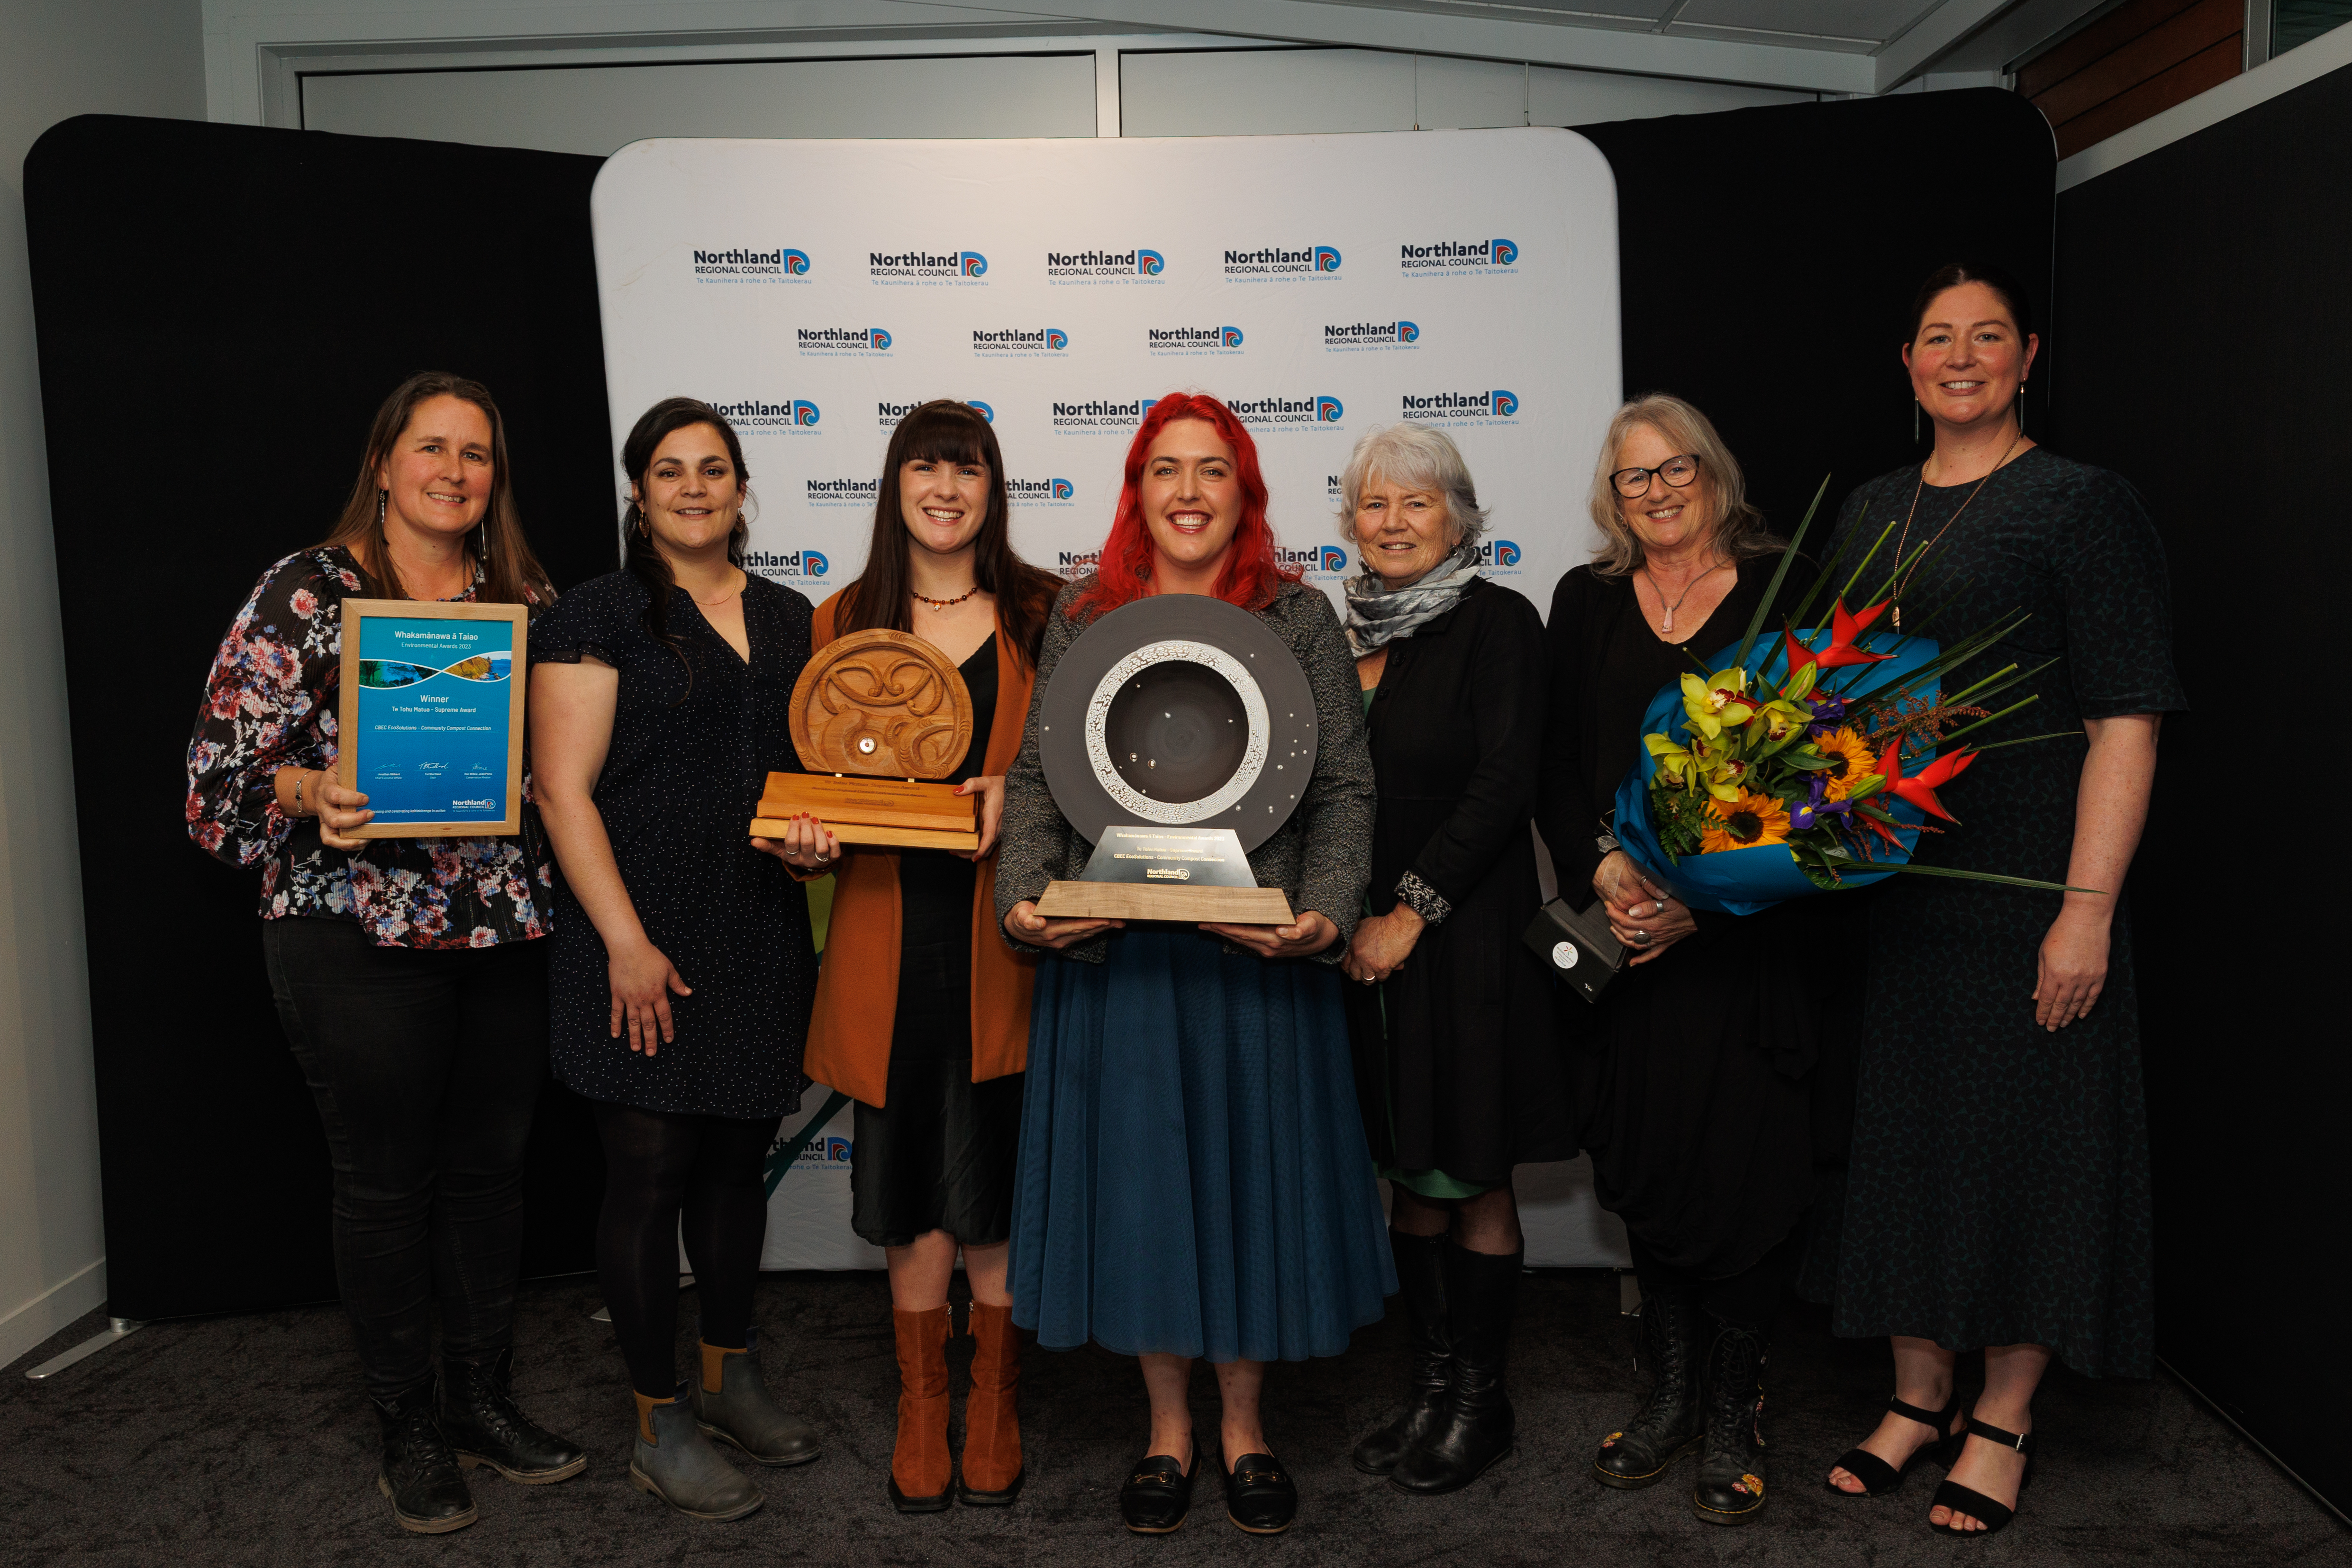 Northland Regional Council Whakamānawa ā Taiao – Environmental Awards, Te Tohu Matua – Supreme Award winners, CBEC EcoSolutions at the Friday 21 July ceremony in Whangarei.  Conservation Minister Willow-Jean Prime – who presented the award – can be seen far right.  (Photocredit: Dawn Dutton Photography)